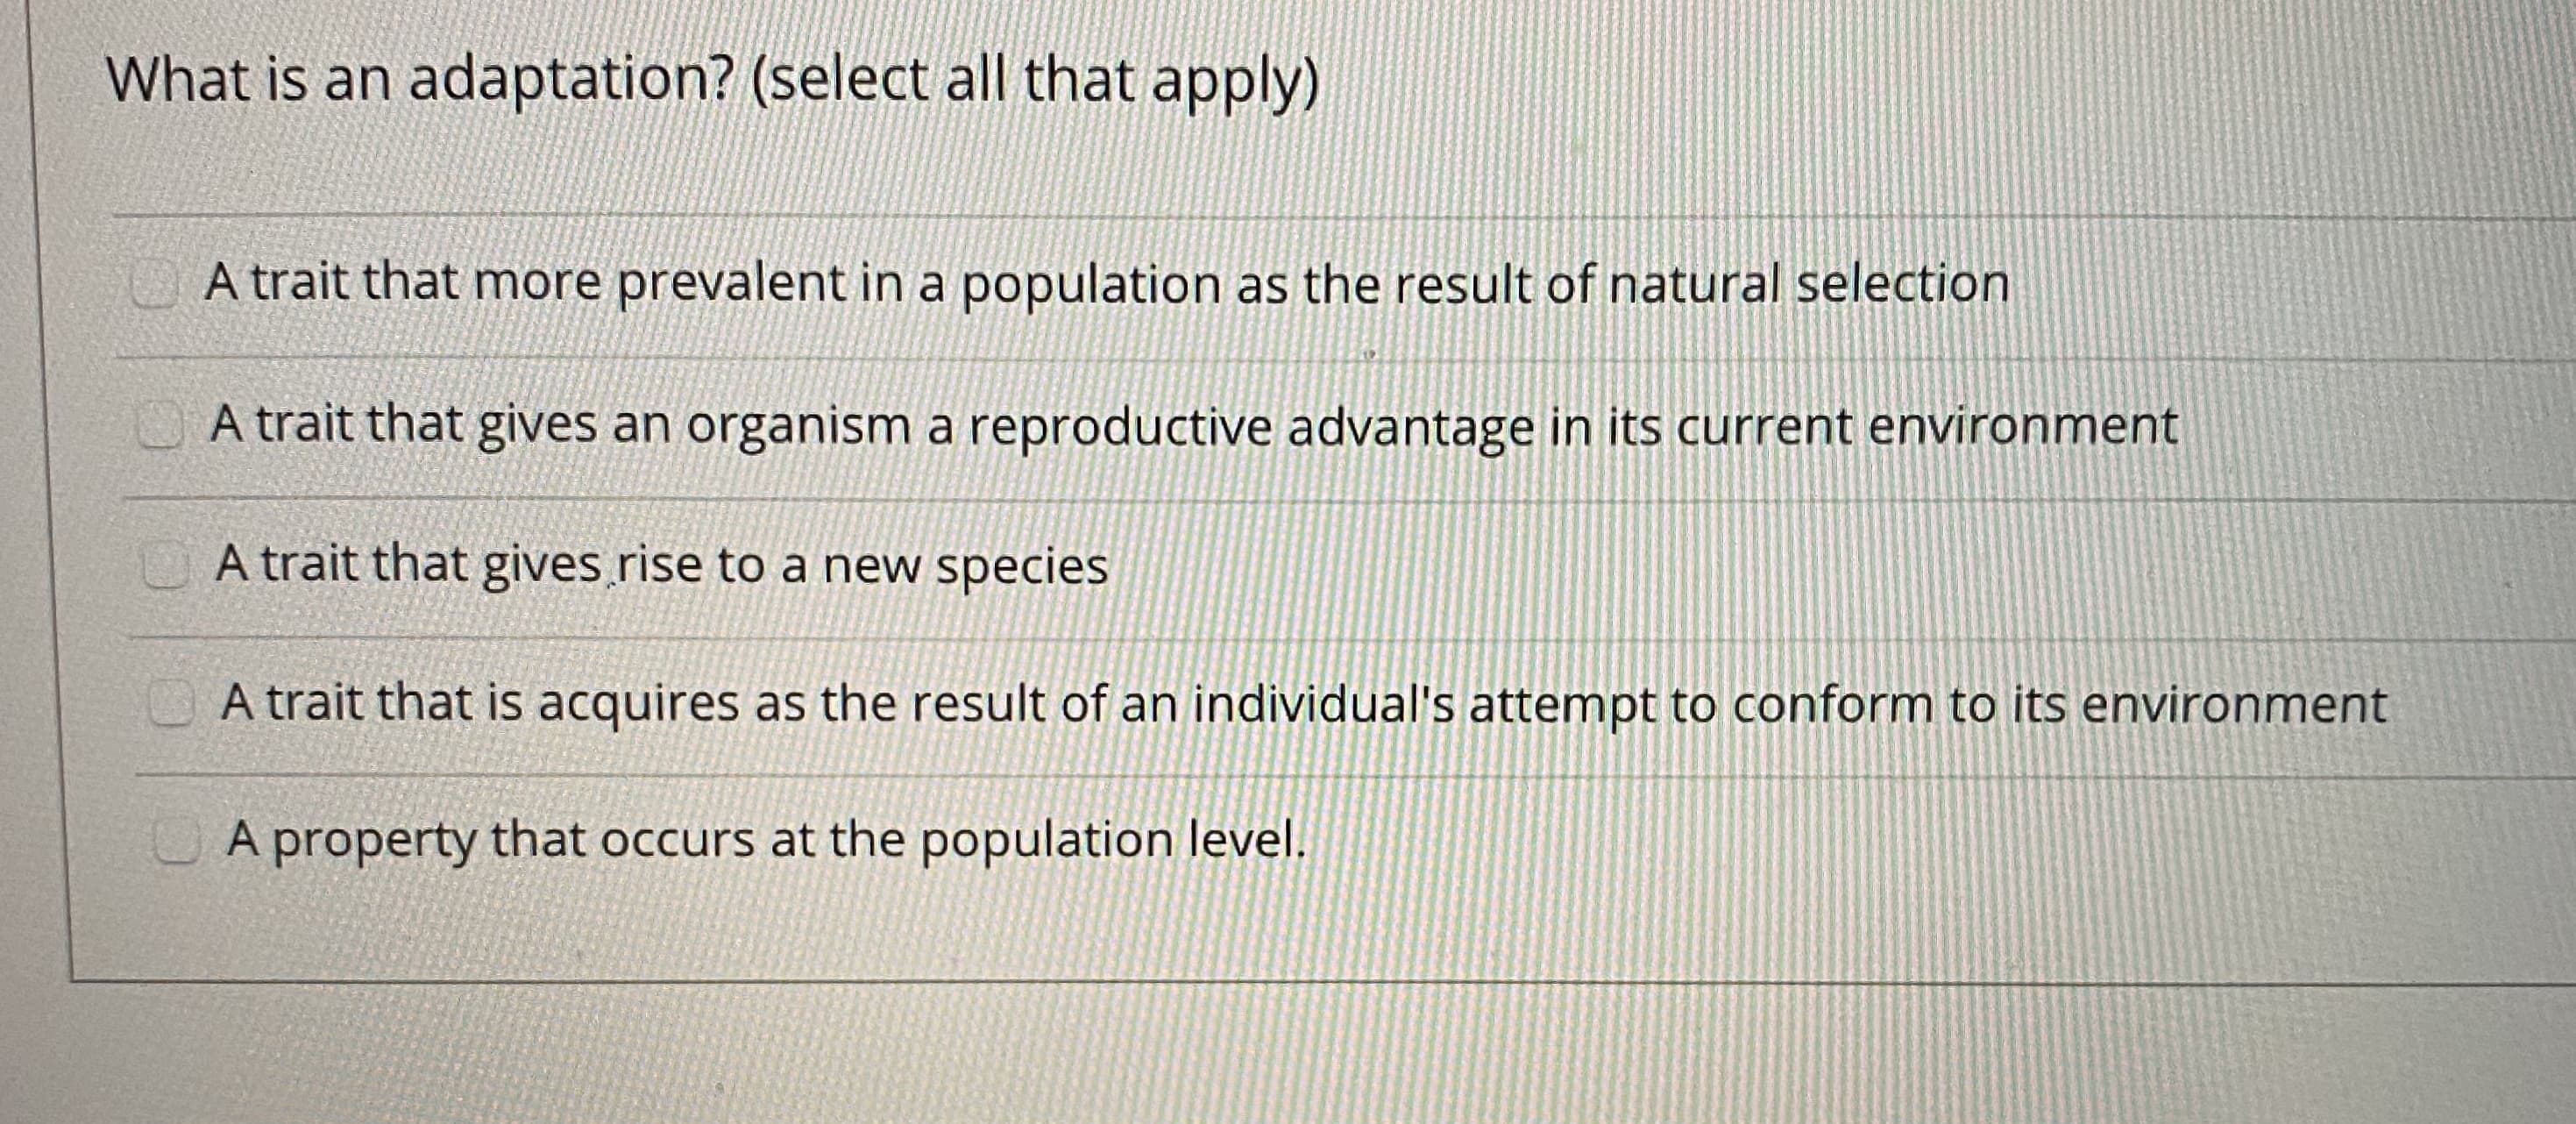 What is an adaptation? (select all that apply)
A trait that more prevalent in a population as the result of natural selection
O A trait that gives an organism a reproductive advantage in its current environment
A trait that gives rise to a new species
